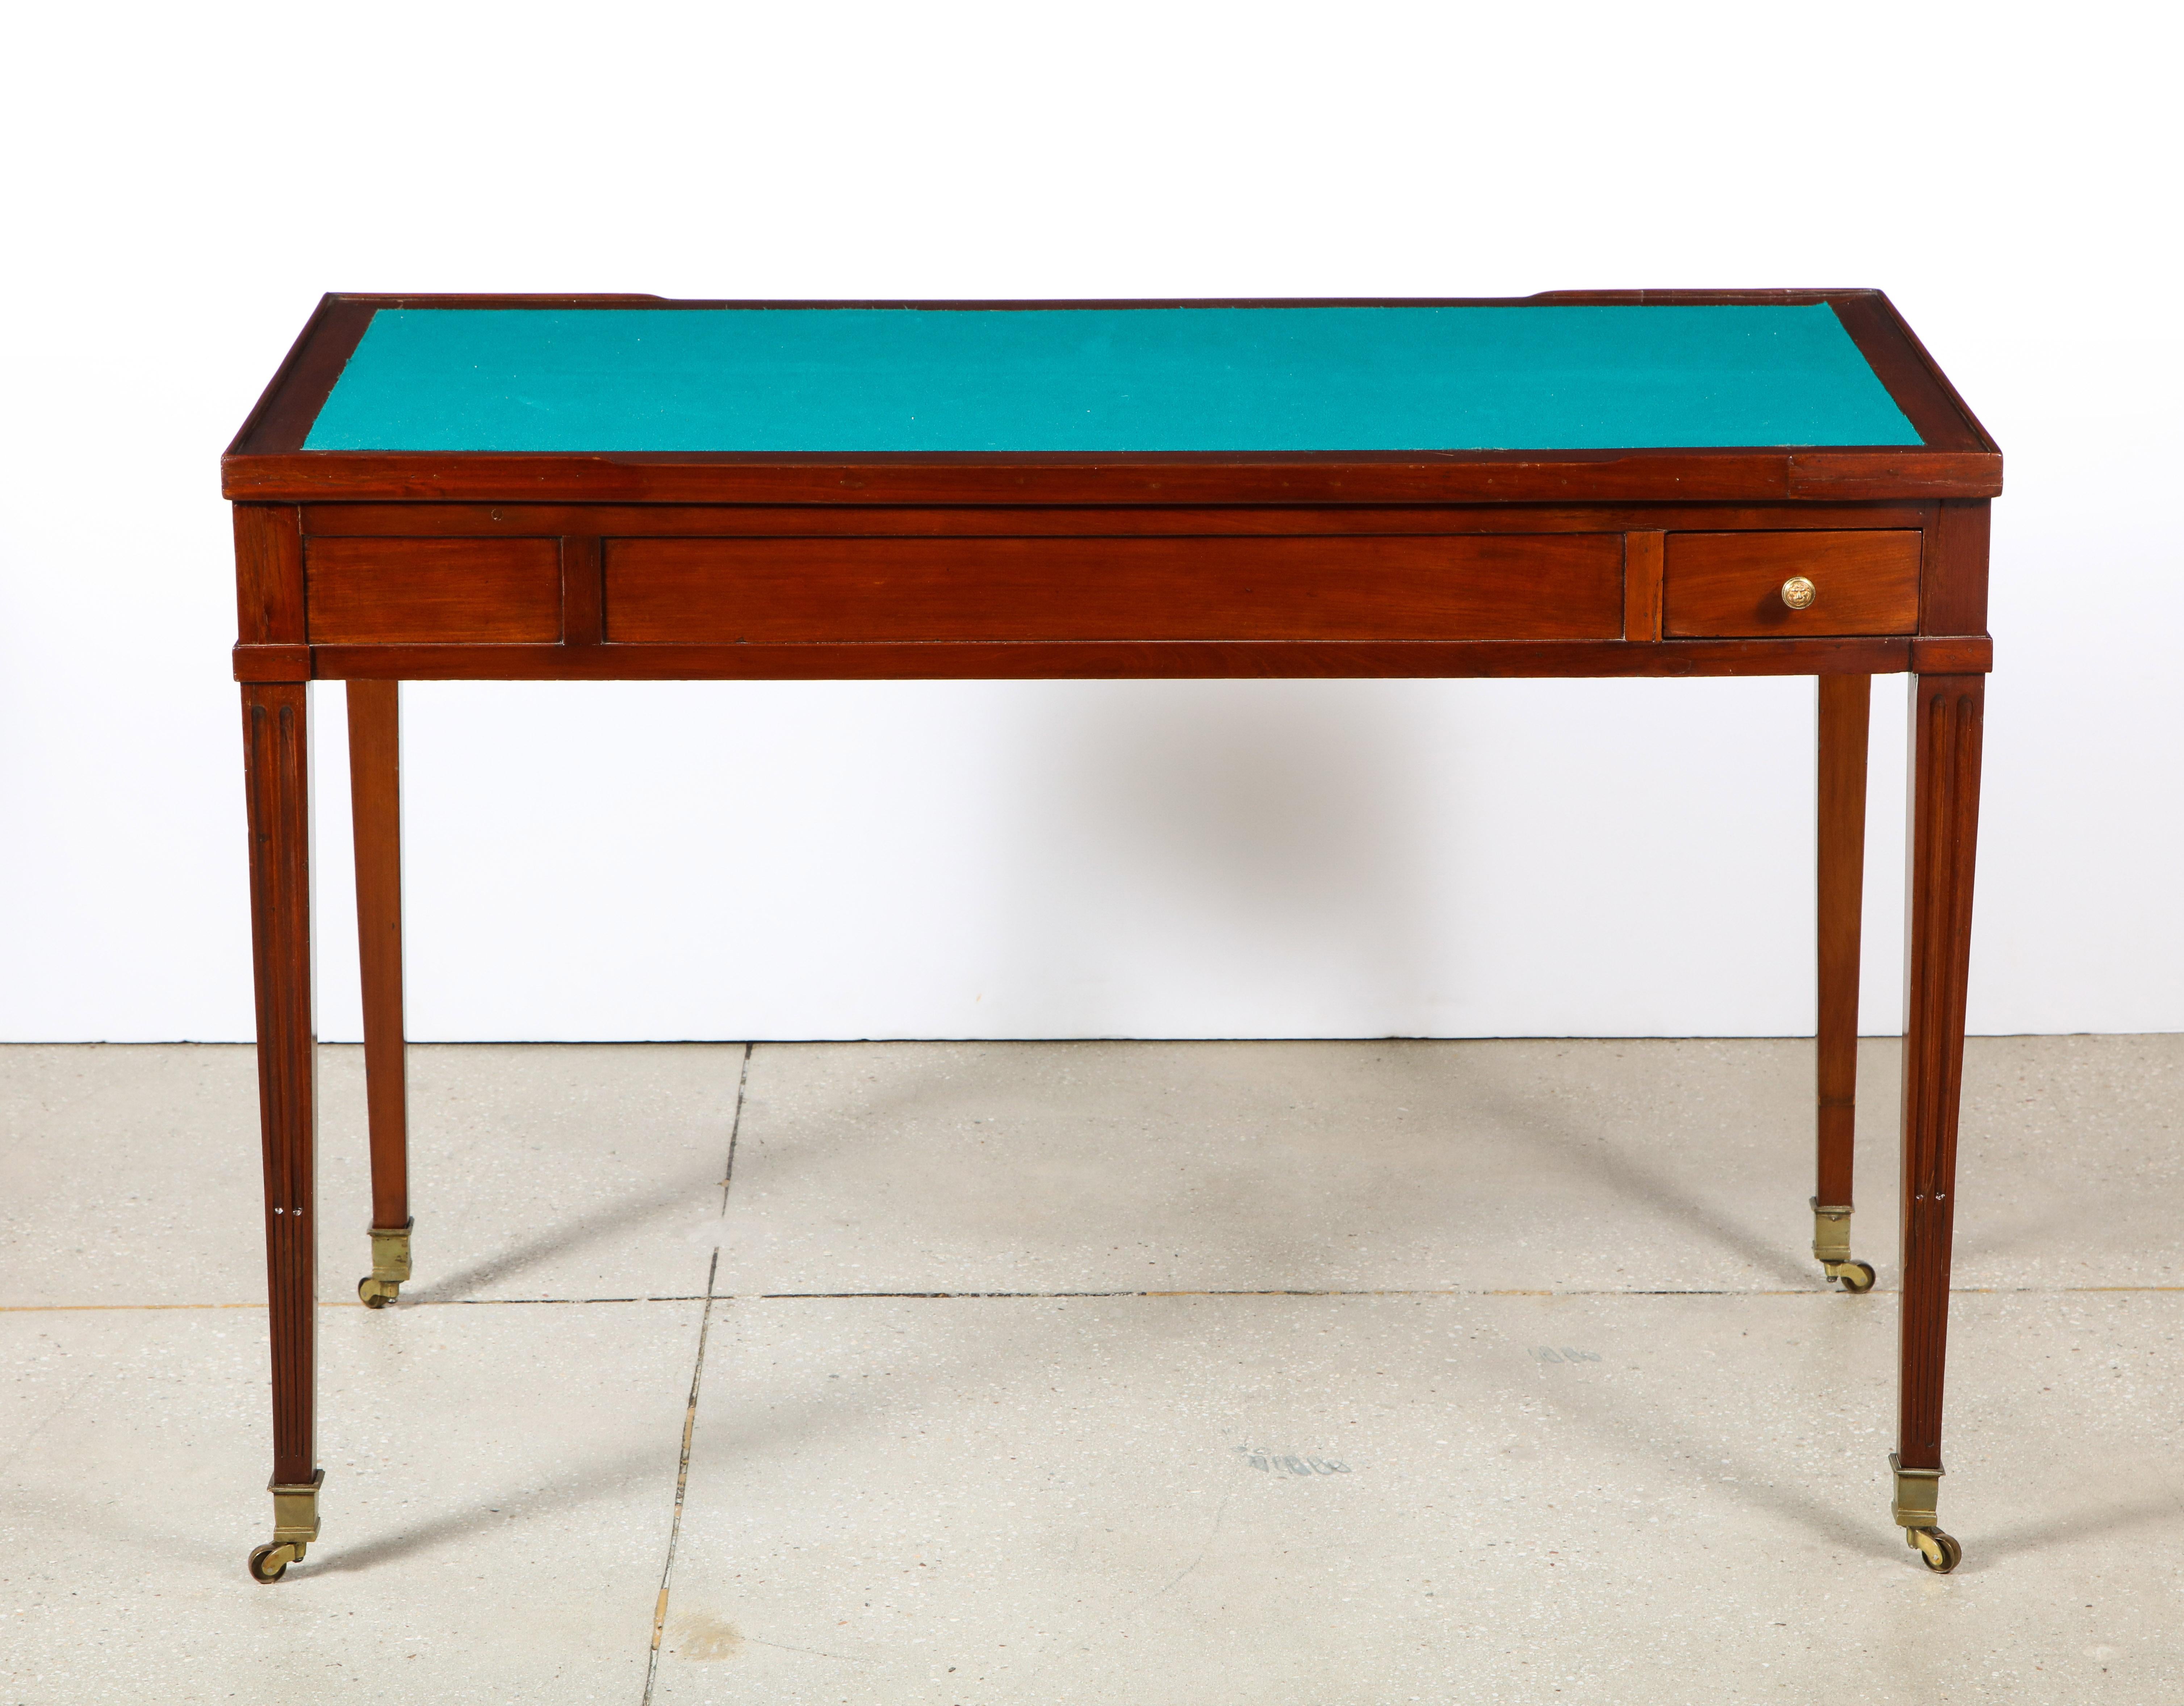 The dual side felt inset top, removes to reveal ebony interior inlaid with stained fruitwood to create backgammon board. 2 exterior drawers and all on tapered legs with brass castors.
    